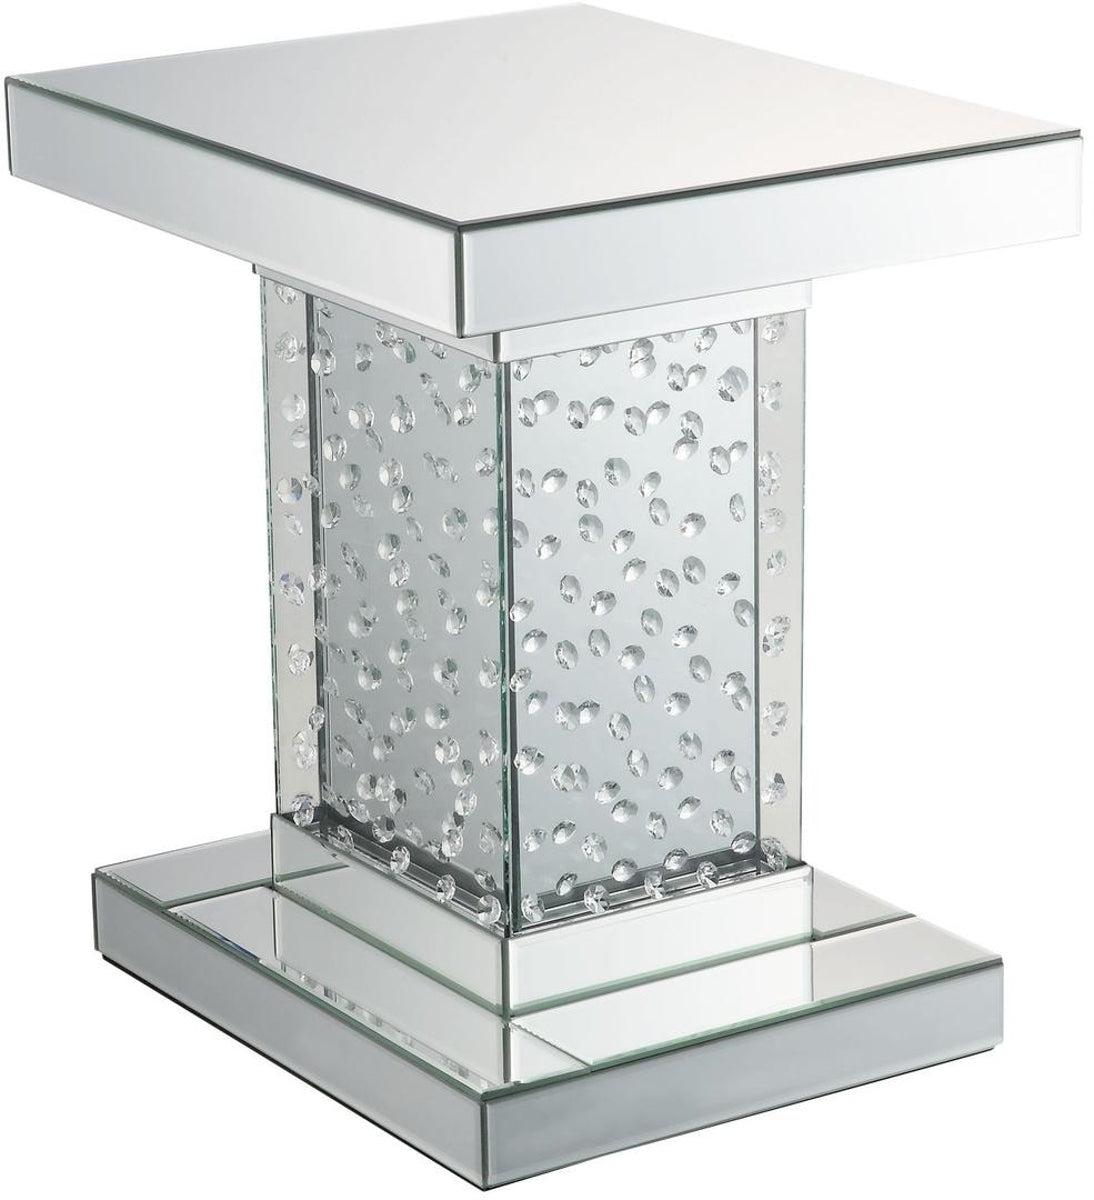 Acme Furniture Nysa End Table in Mirrored & Faux Crystals 80284  Las Vegas Furniture Stores